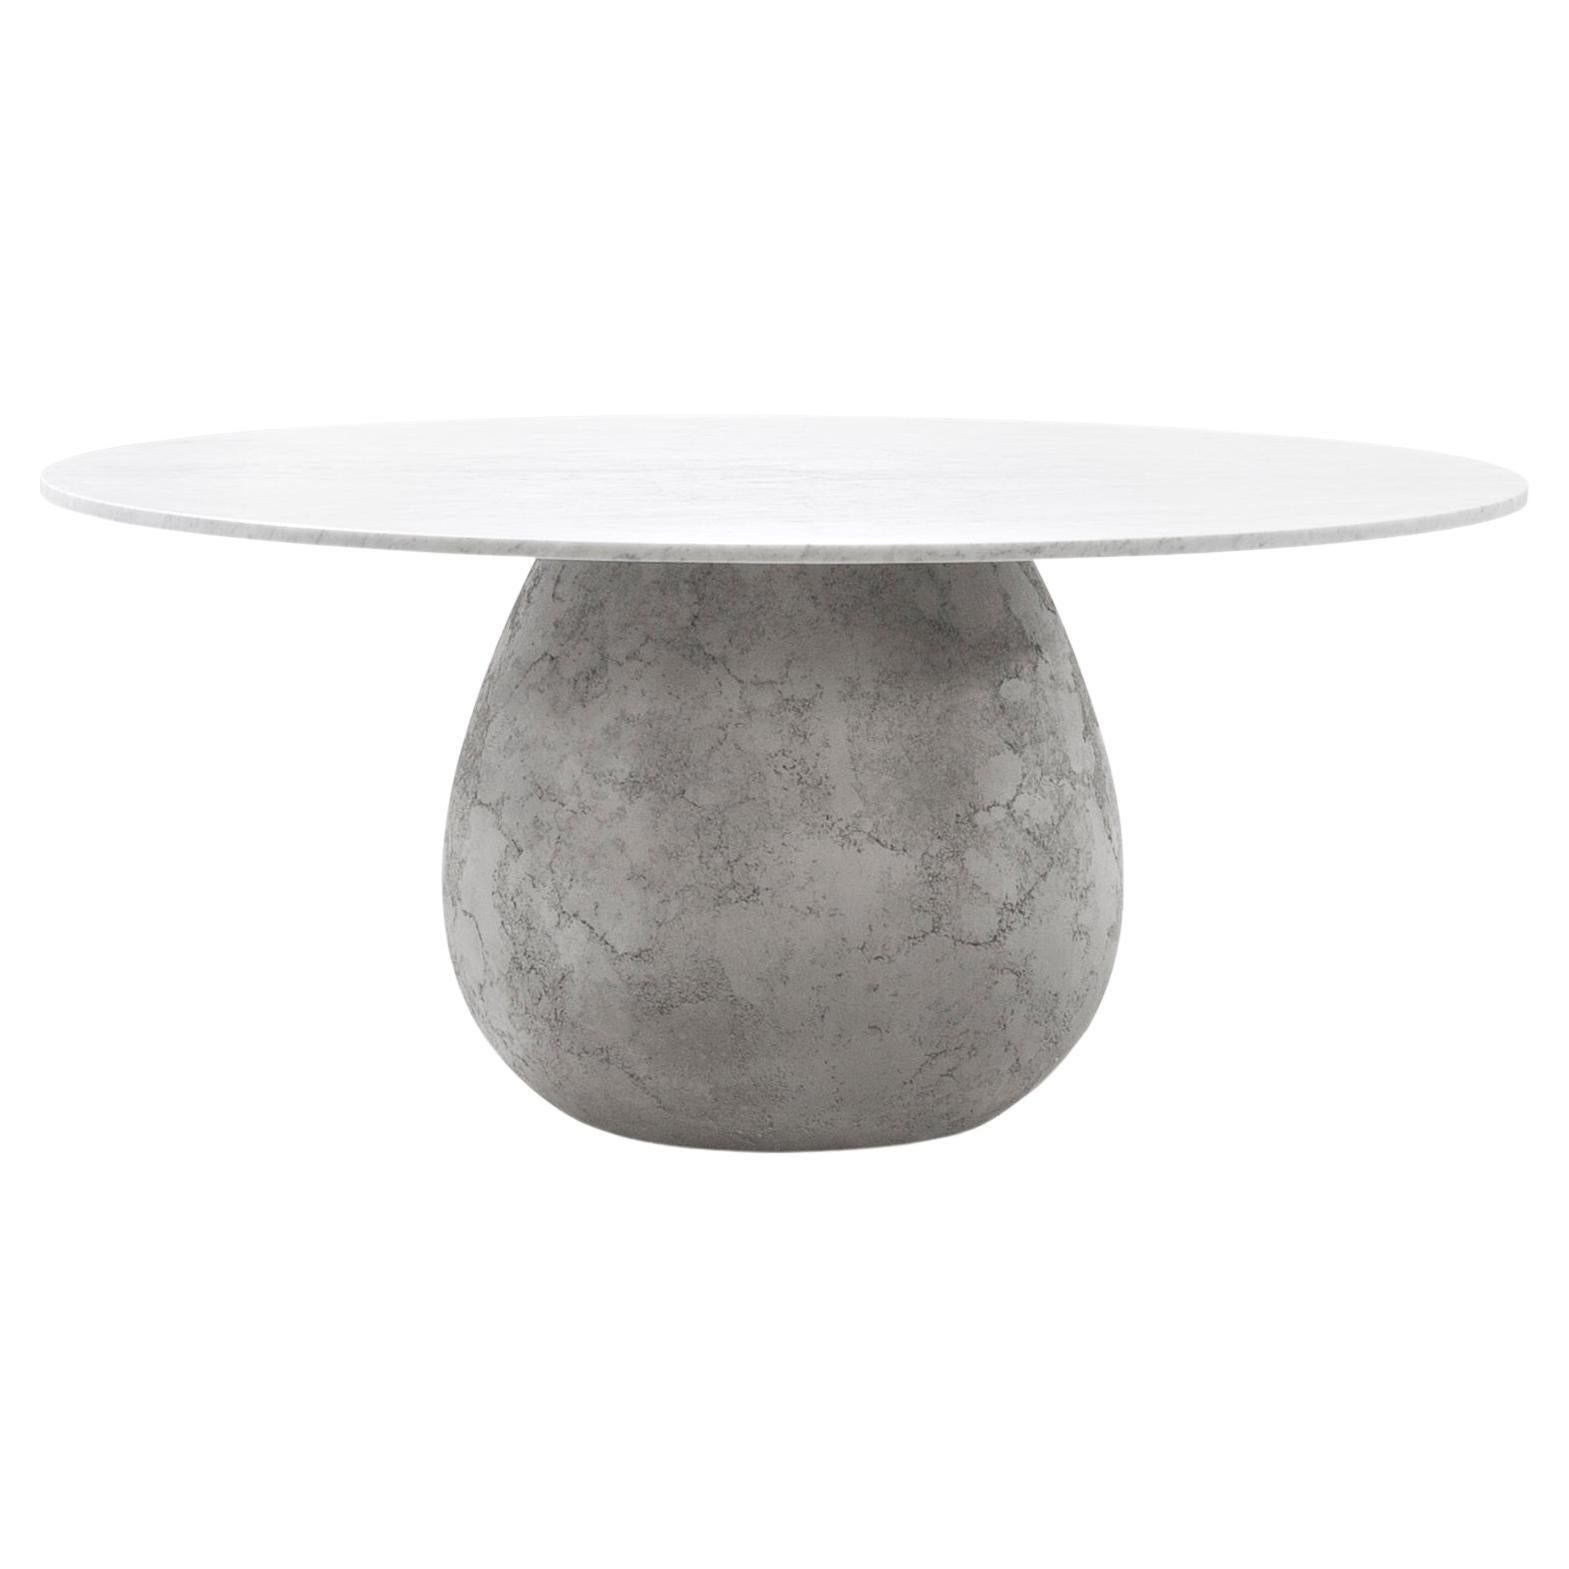 Gervasoni Next 232 Table with Concrete Base & Carrara Marble Top by Paola Navone For Sale